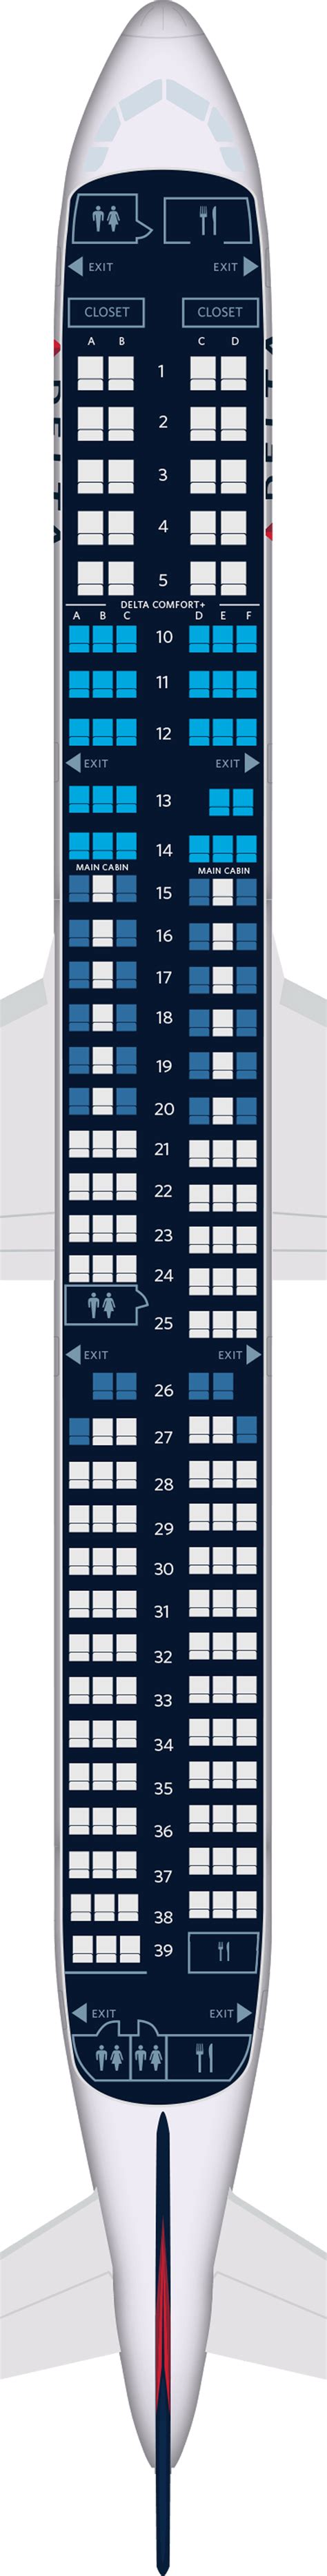 Delta 321 seat map. Airbus A321-200 has significant presence in Wizz Air fleet. A321 can carries 230 passengers in a single-class seat map economy configuration. The A321's fuel-efficient engines utilize less fuel than those of comparable aircraft in its class, which reduces operational costs for carriers.The 3,700 nautical mile (6,852 km) maximum range of the A321 lets airlines to go farther between refueling stops. 